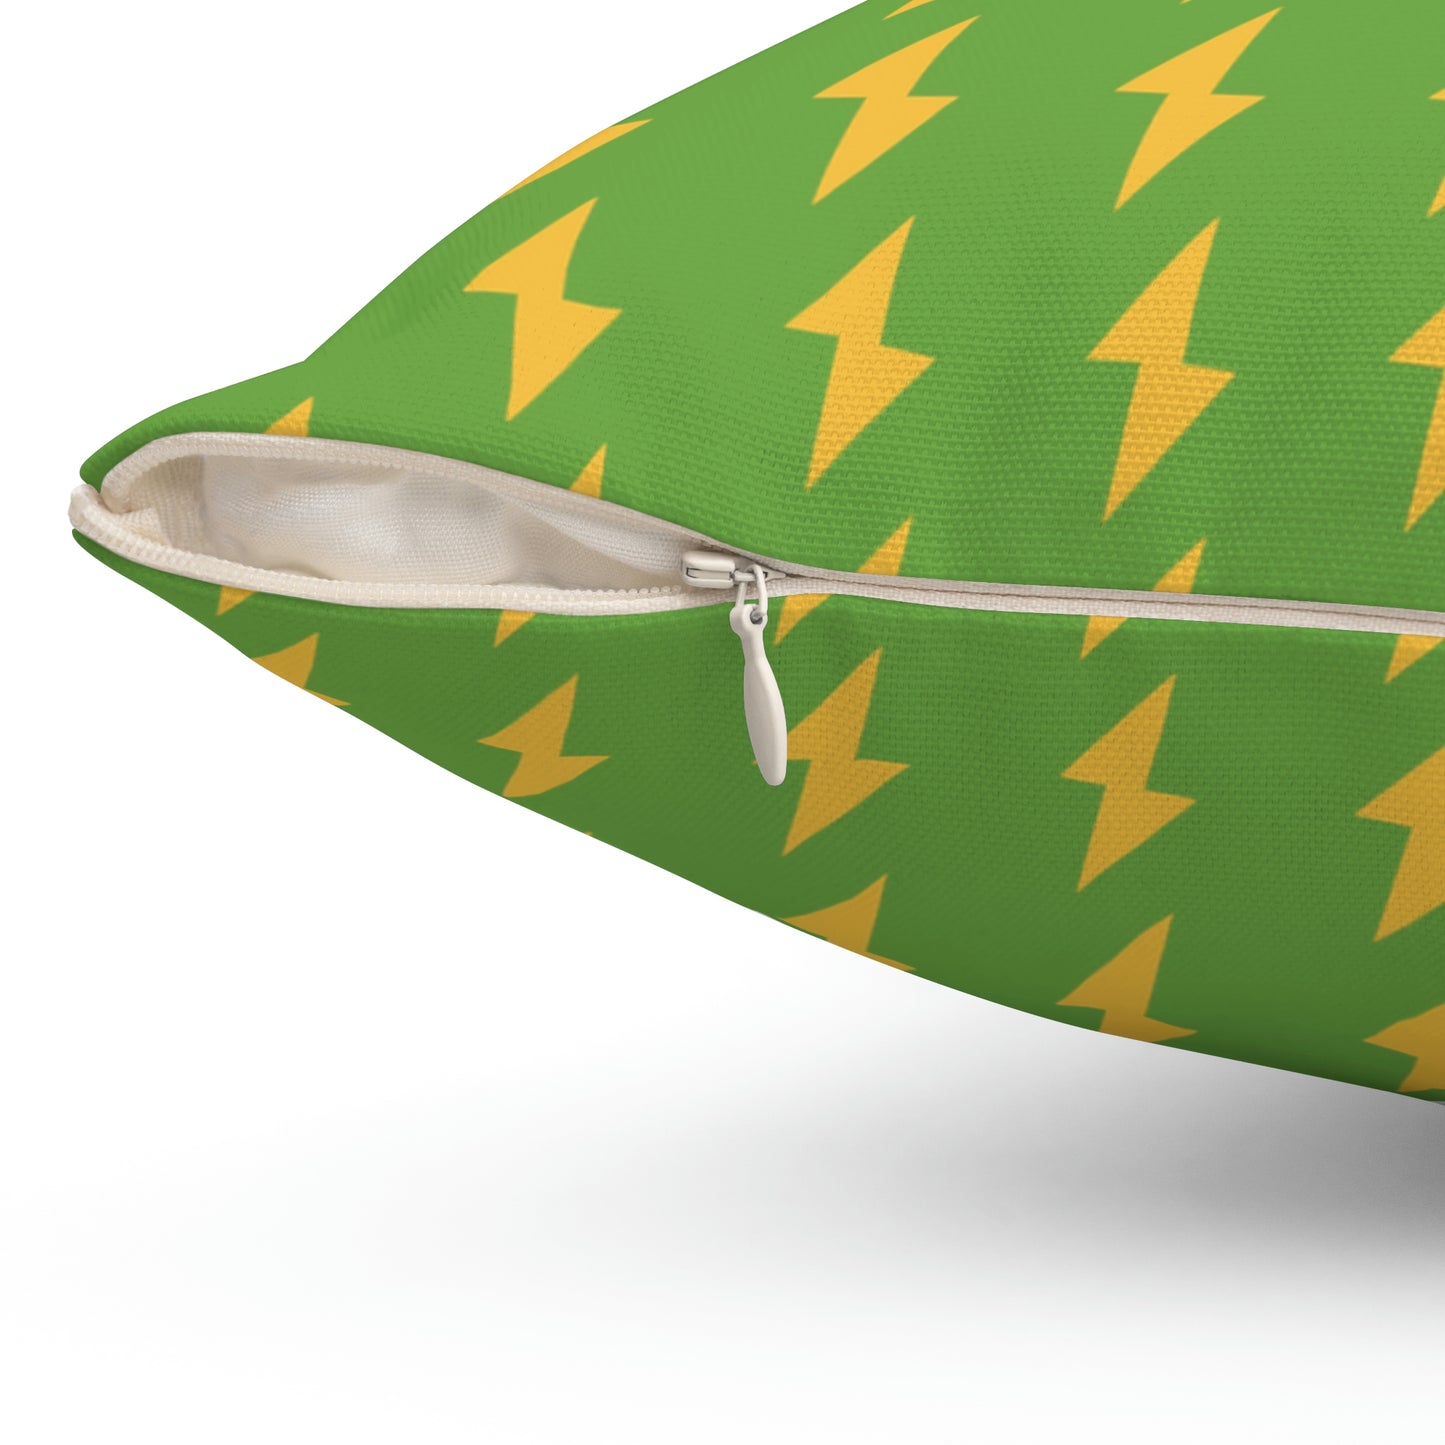 Spun Polyester Square Pillow Case “Electric Bolt on Green”